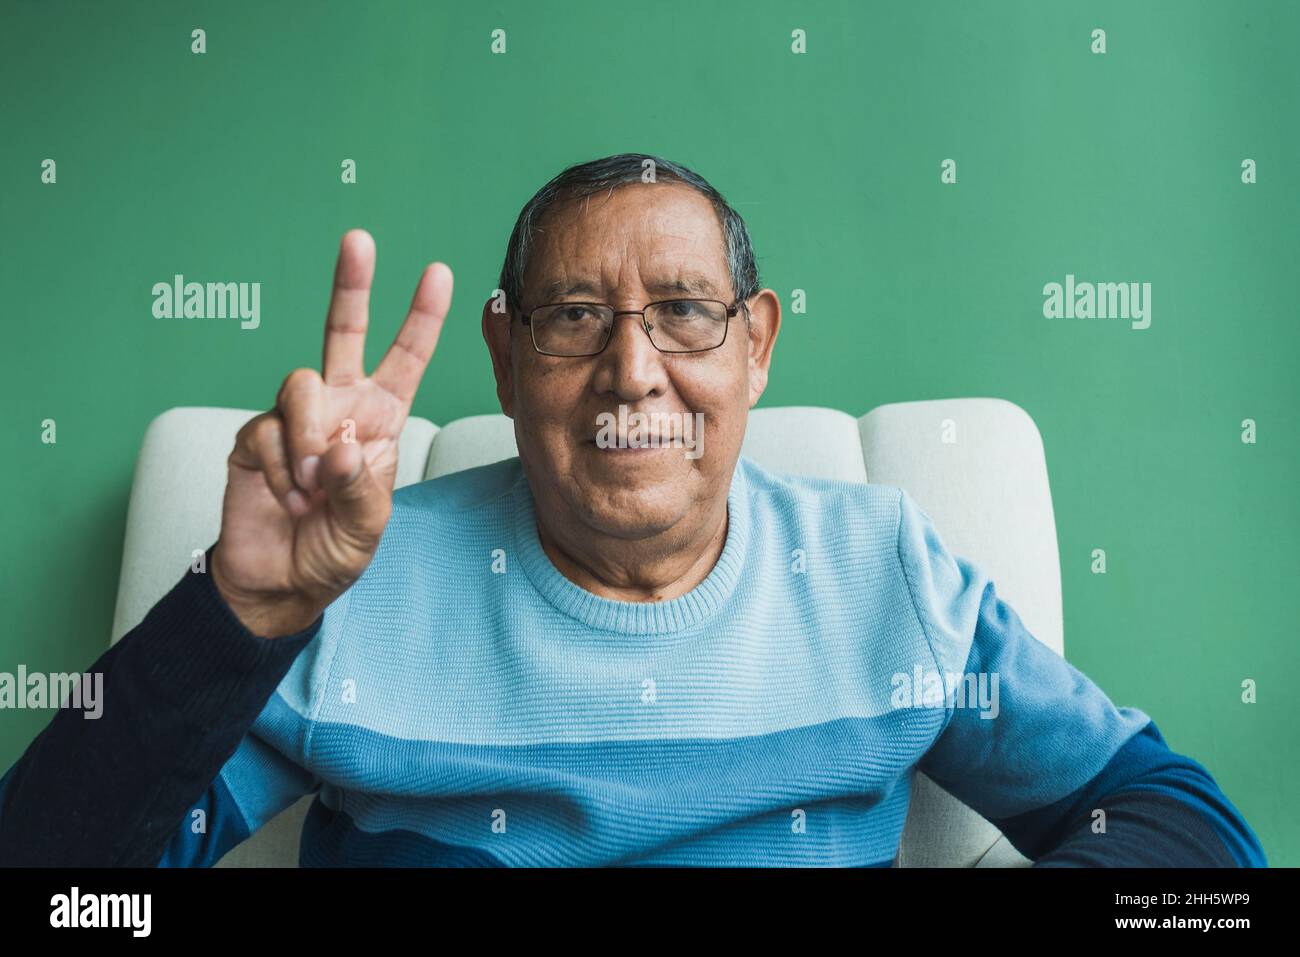 Senior man gesturing peace sign in front of green wall Stock Photo